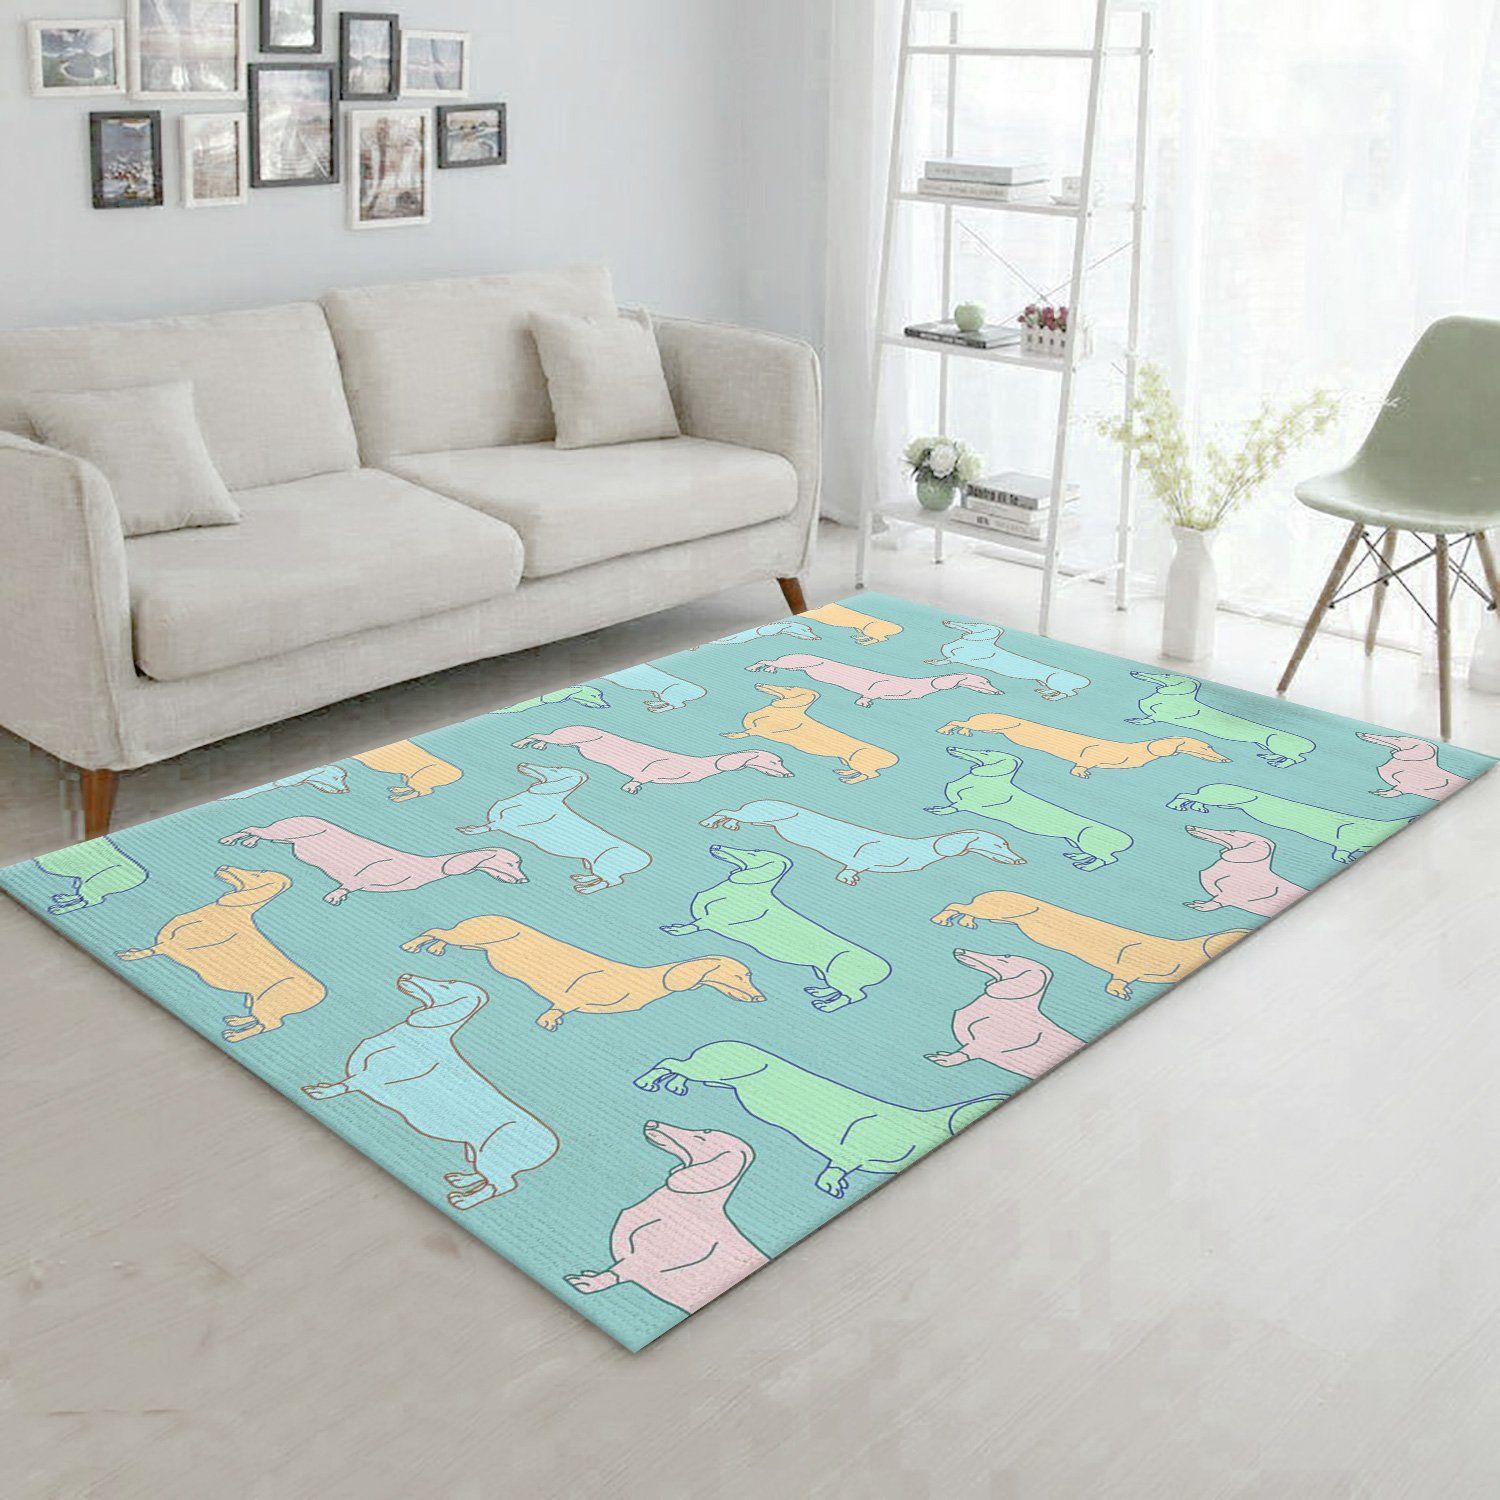 Colorful Dachshund Dogs Area Rug For Christmas, Gift for fans, Christmas Gift US Decor - Indoor Outdoor Rugs 2